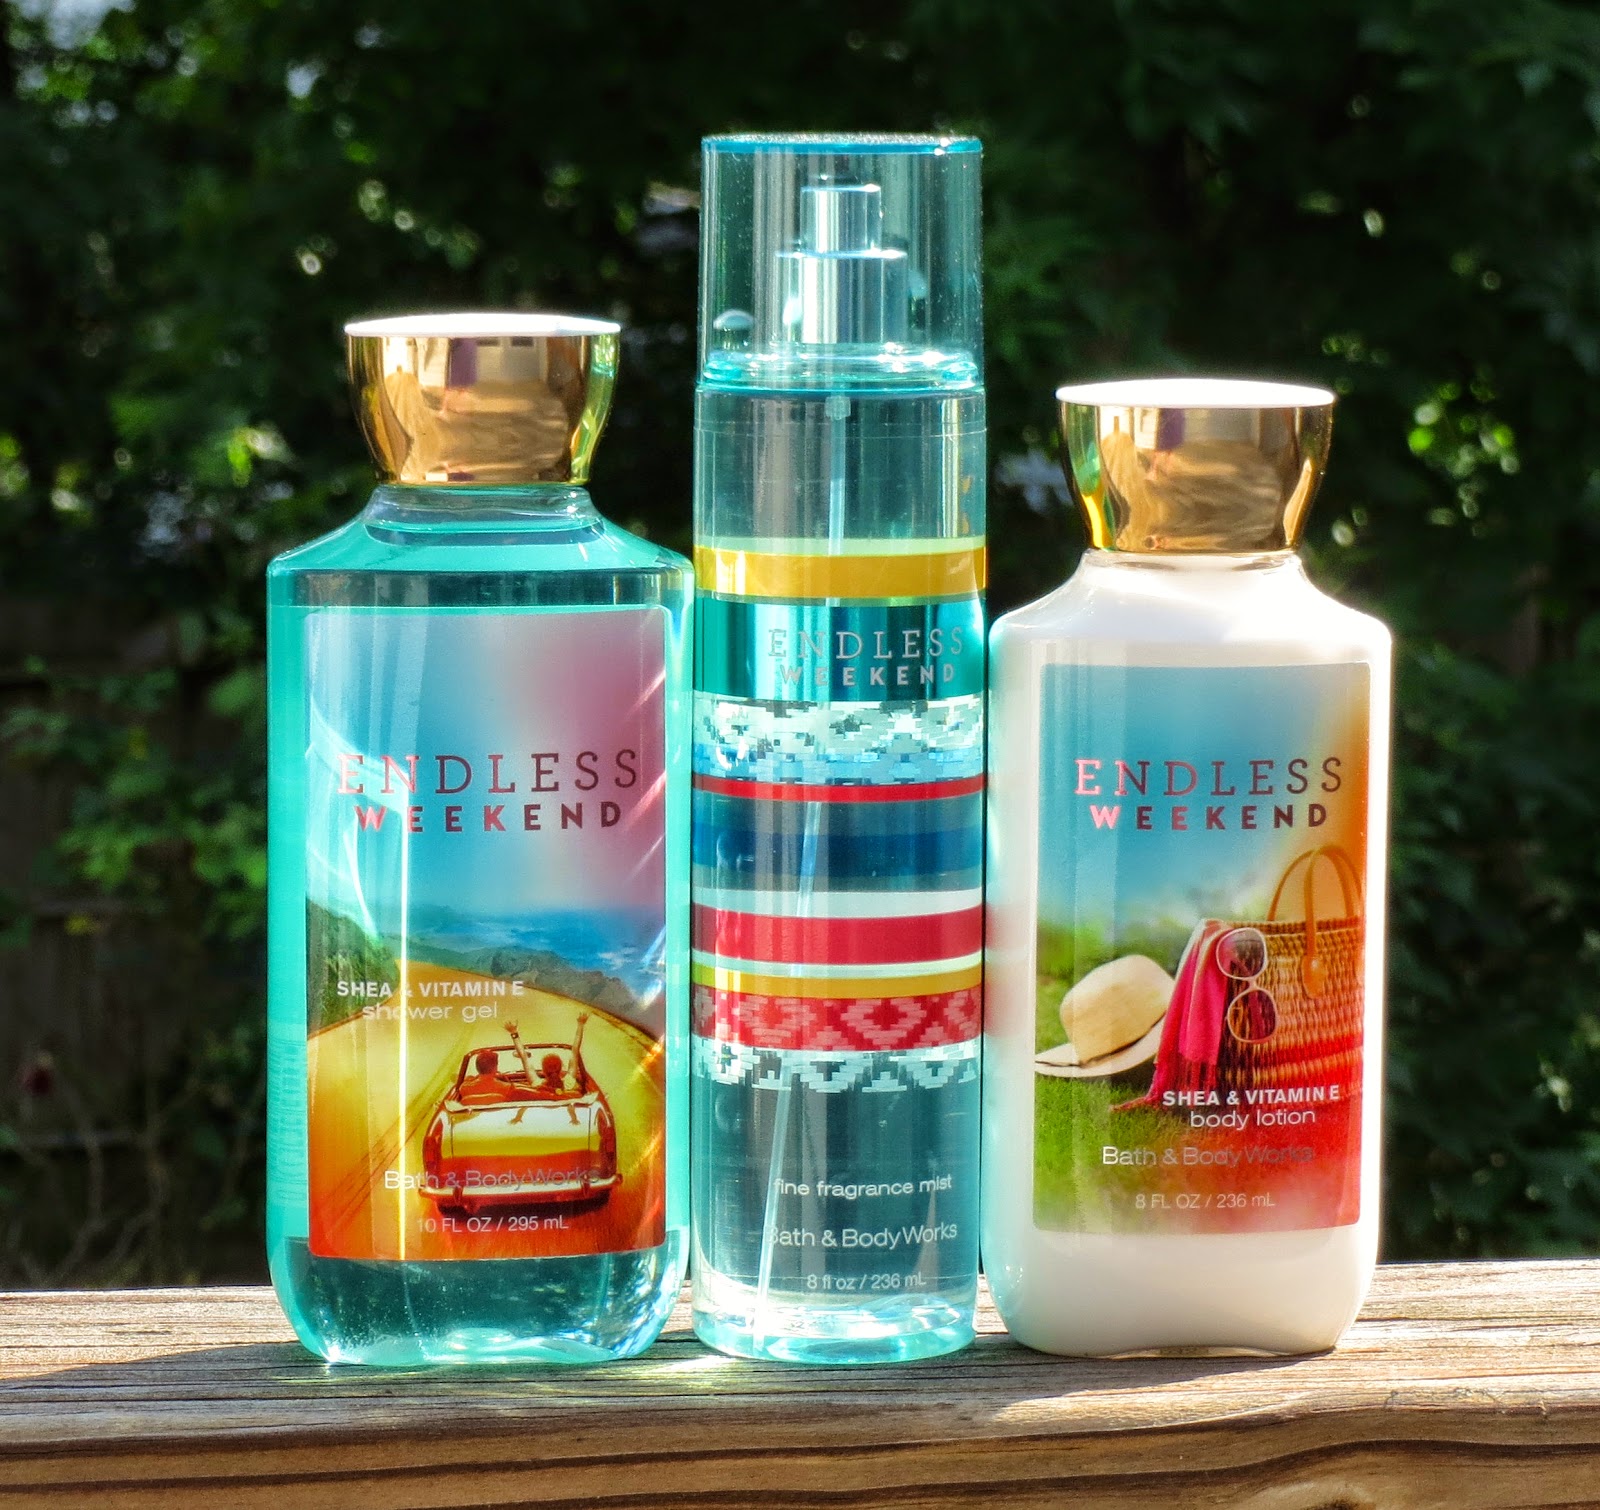 Blue Skies for Me Please: Bath & Body Works - Endless Weekend Collection